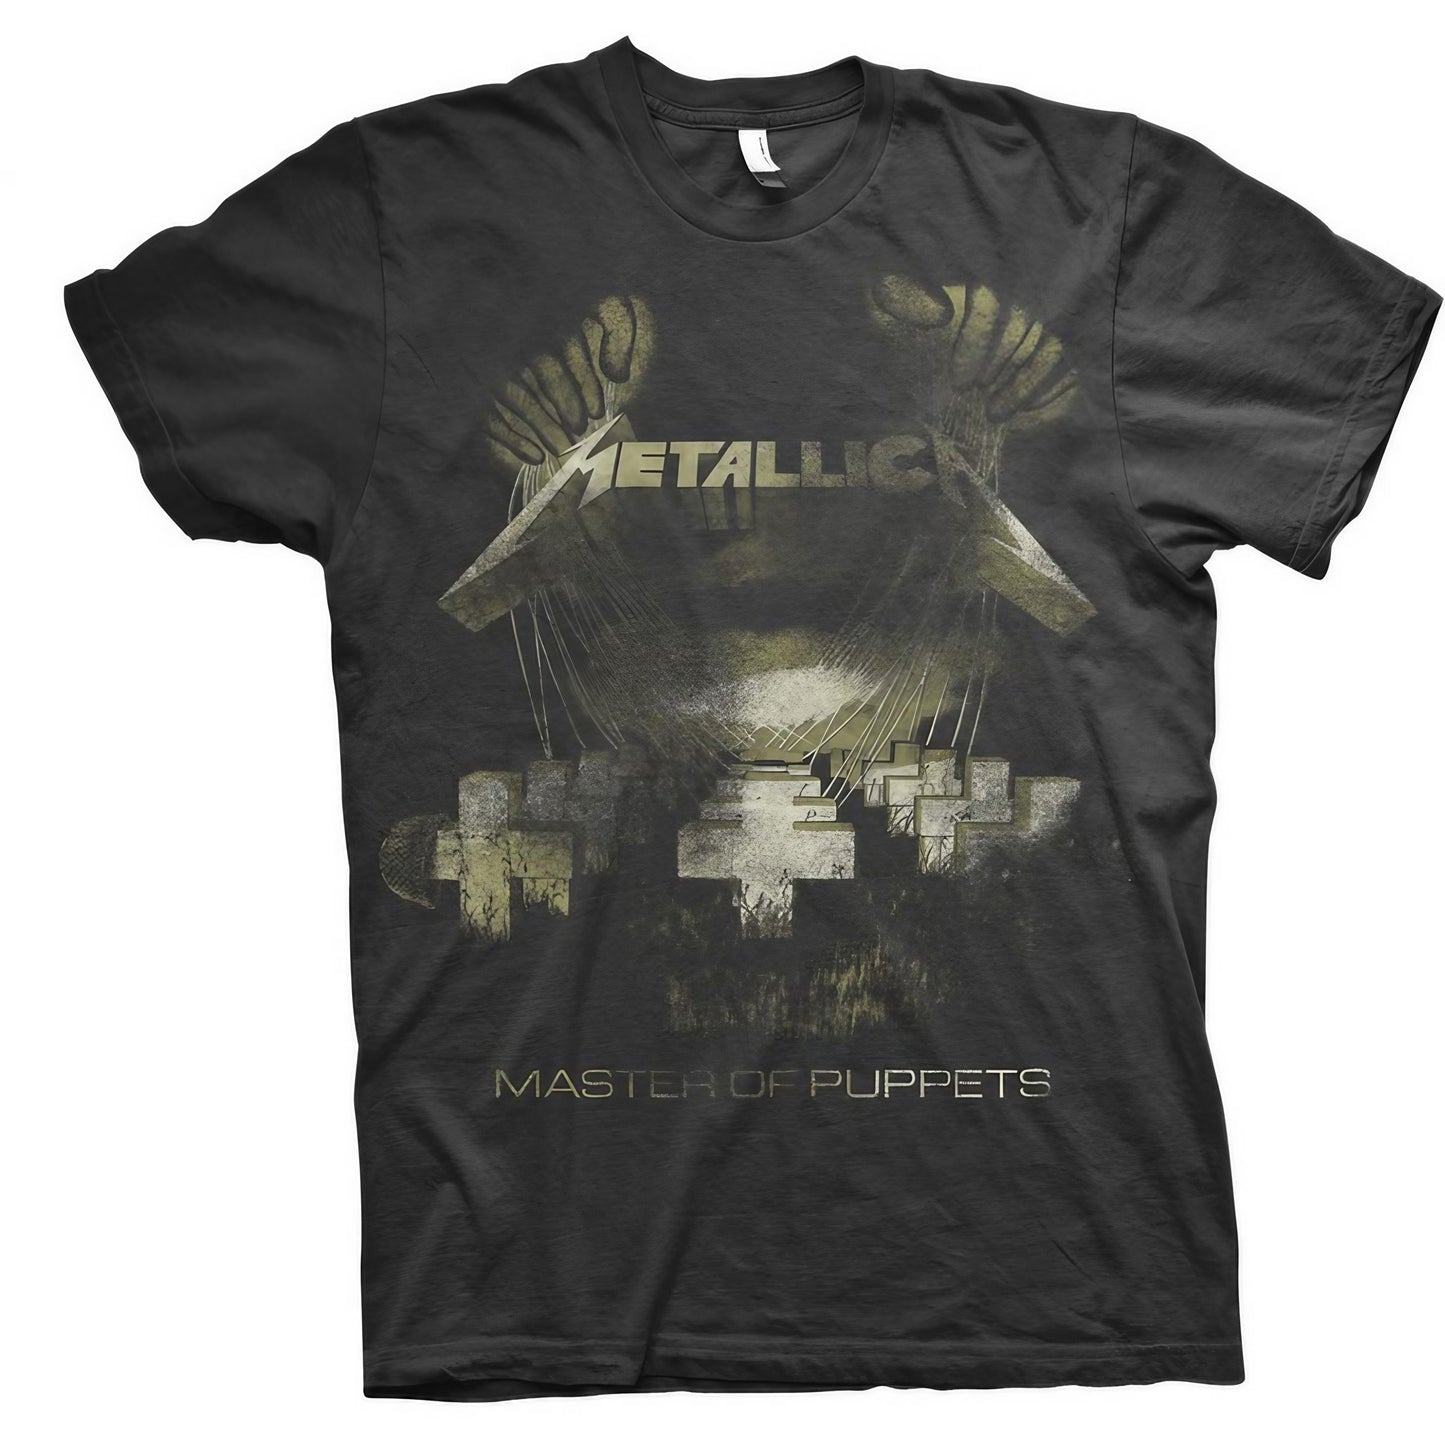 METALLICA - Master Of Puppets Distressed T-Shirt